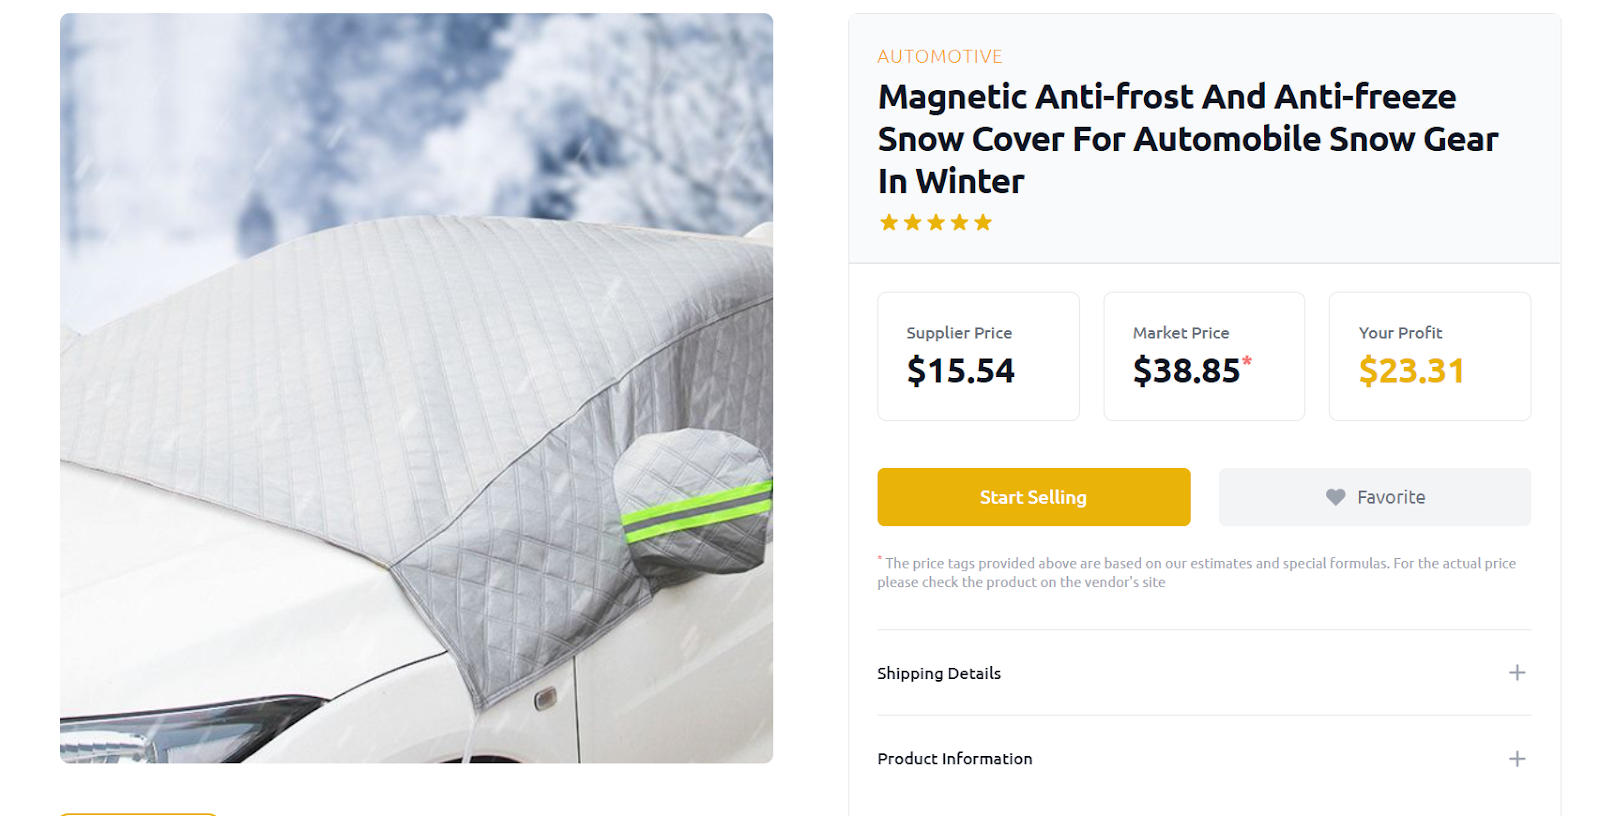 Magnetic Anti-frost And Anti-freeze Snow Cover 